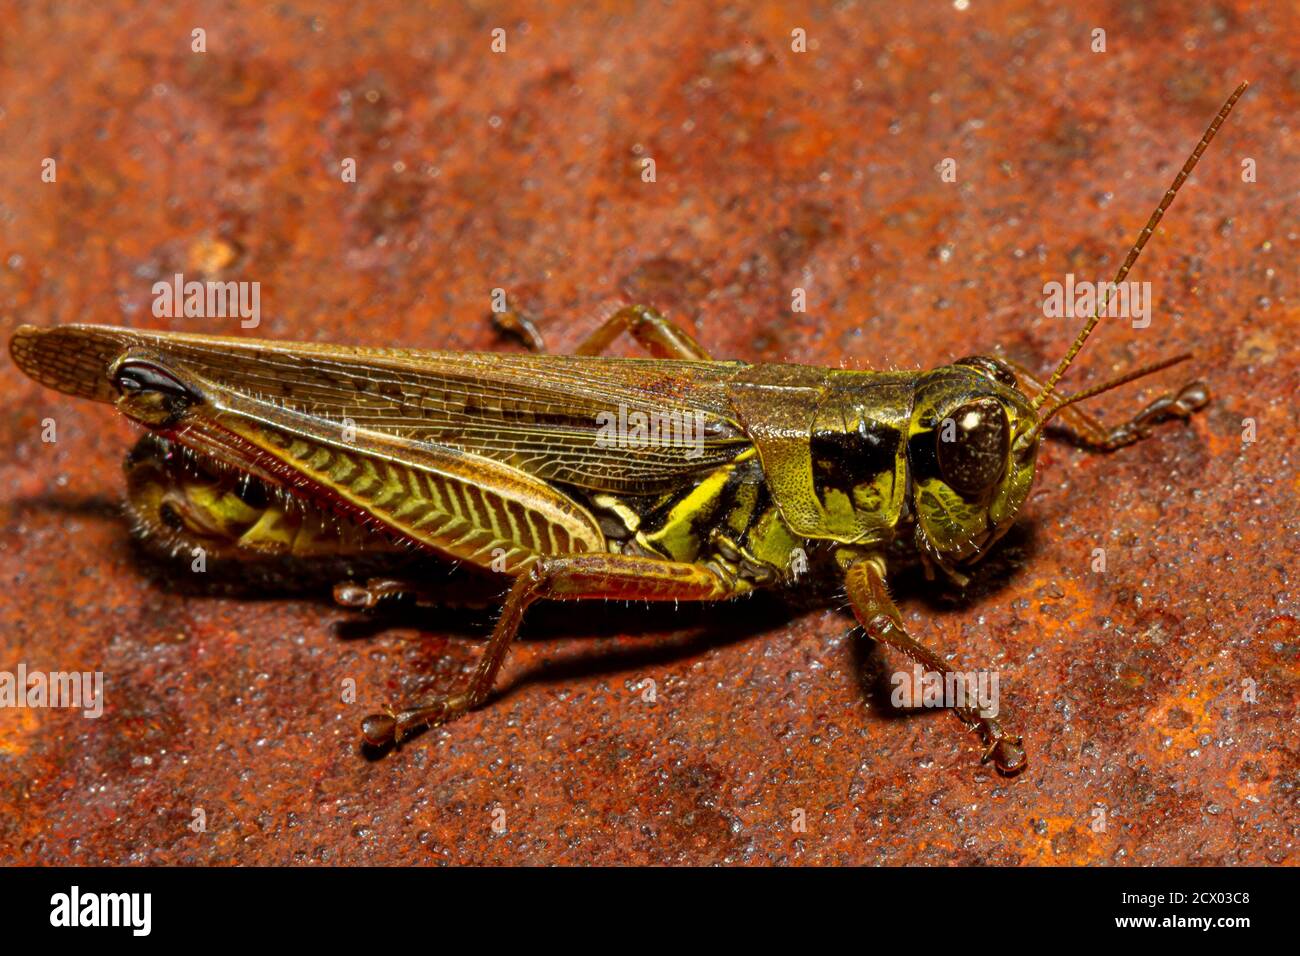 Red Legged Grasshopper High Resolution Stock and - Alamy